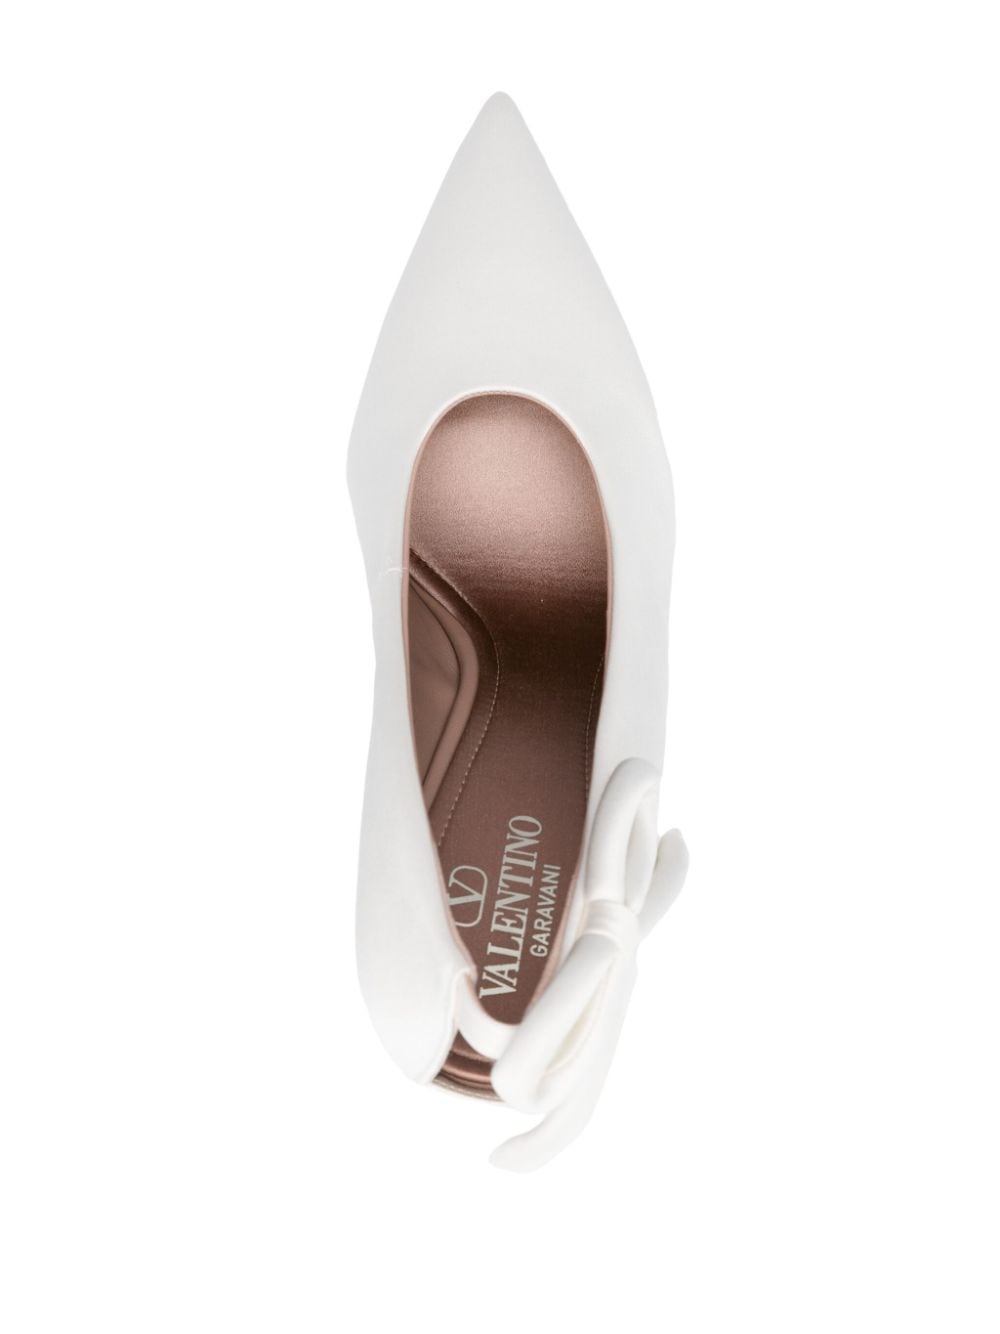 Shop Valentino Nite-out 110mm Satin Pumps In White